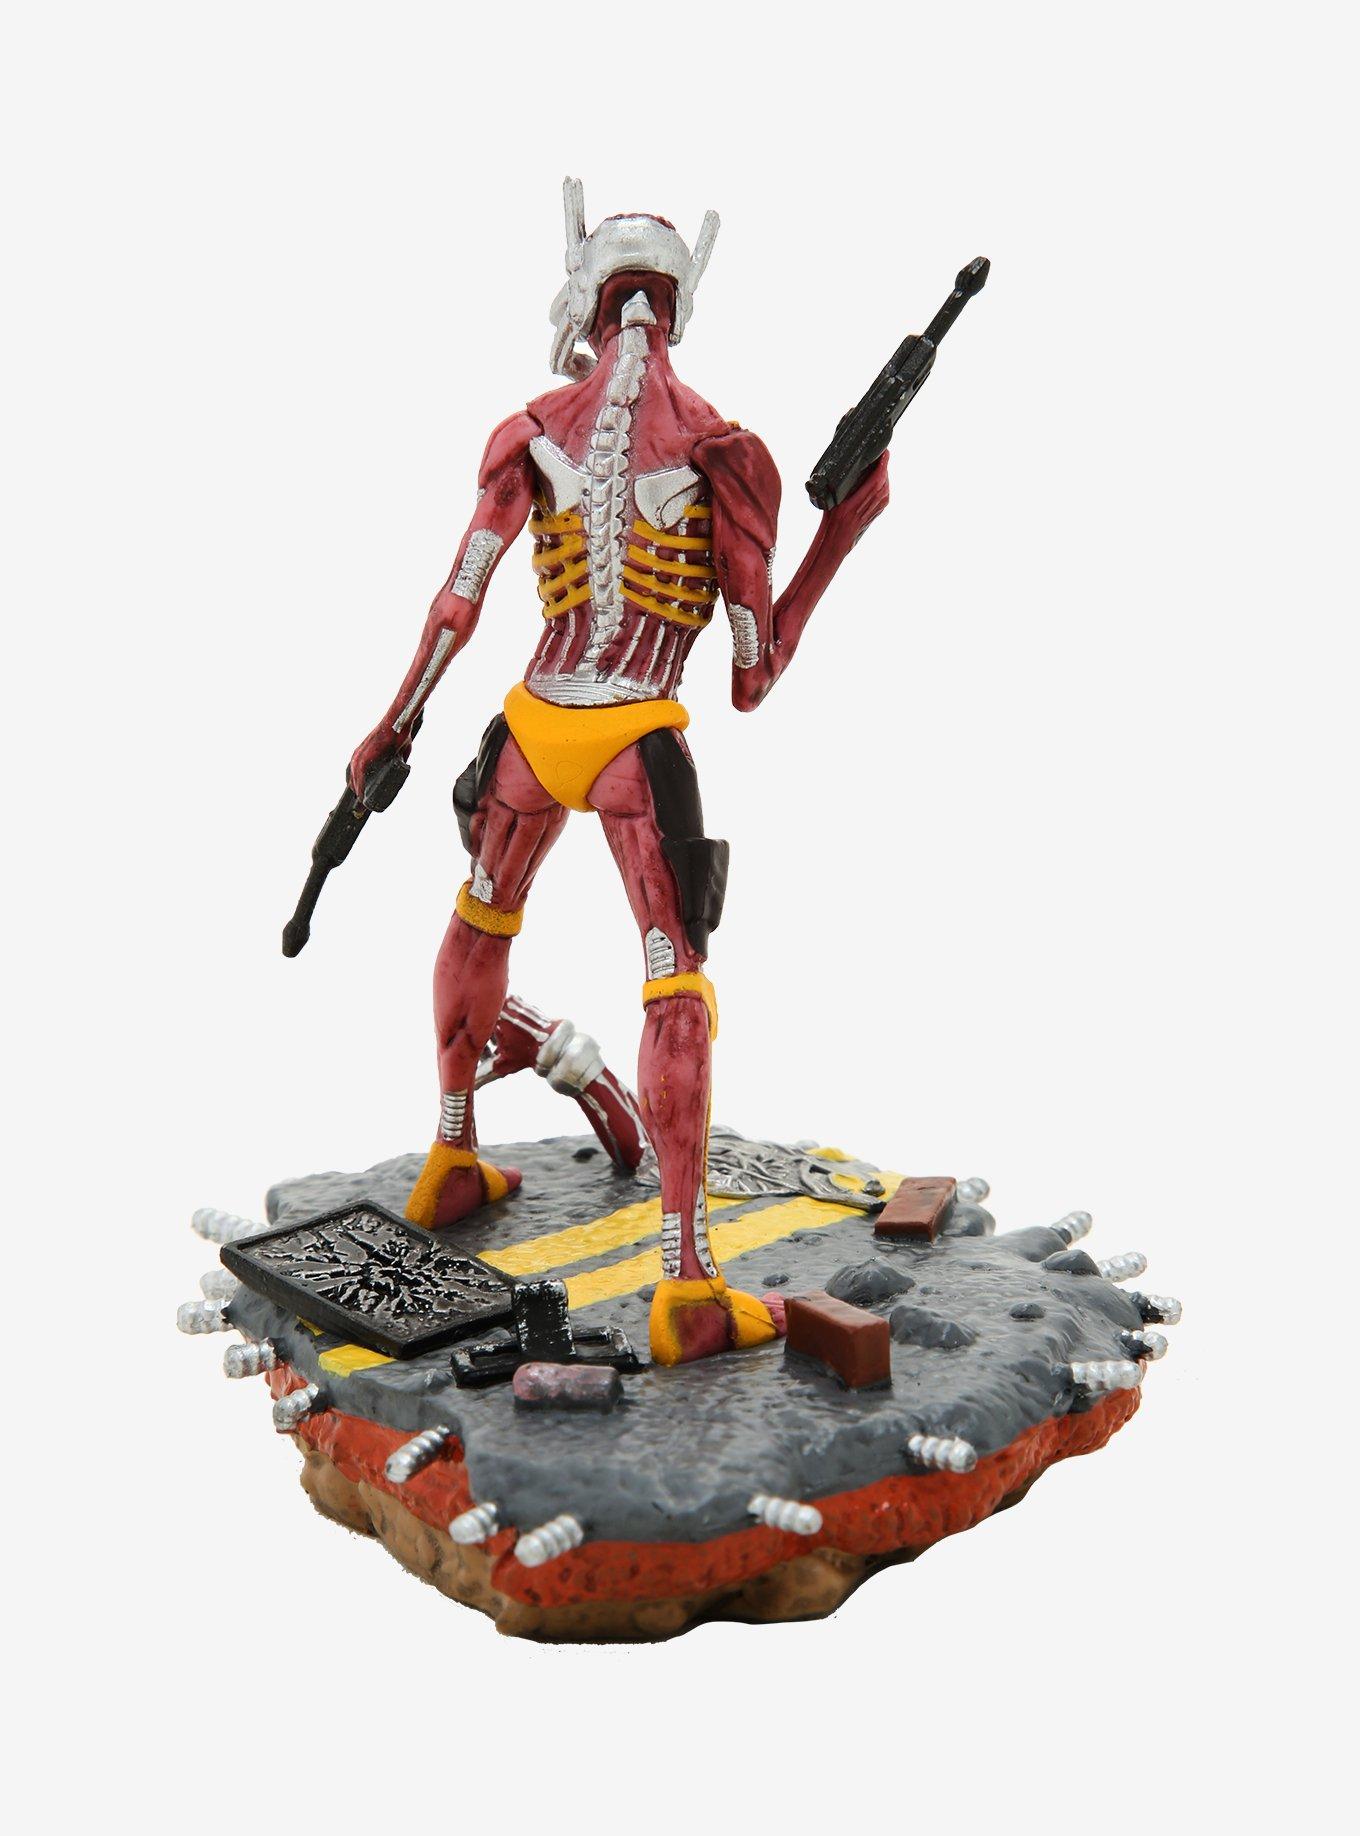 Iron Maiden Legacy Of The Beast Somewhere In Time: Cyborg Eddie Limited Edition Figure, , alternate